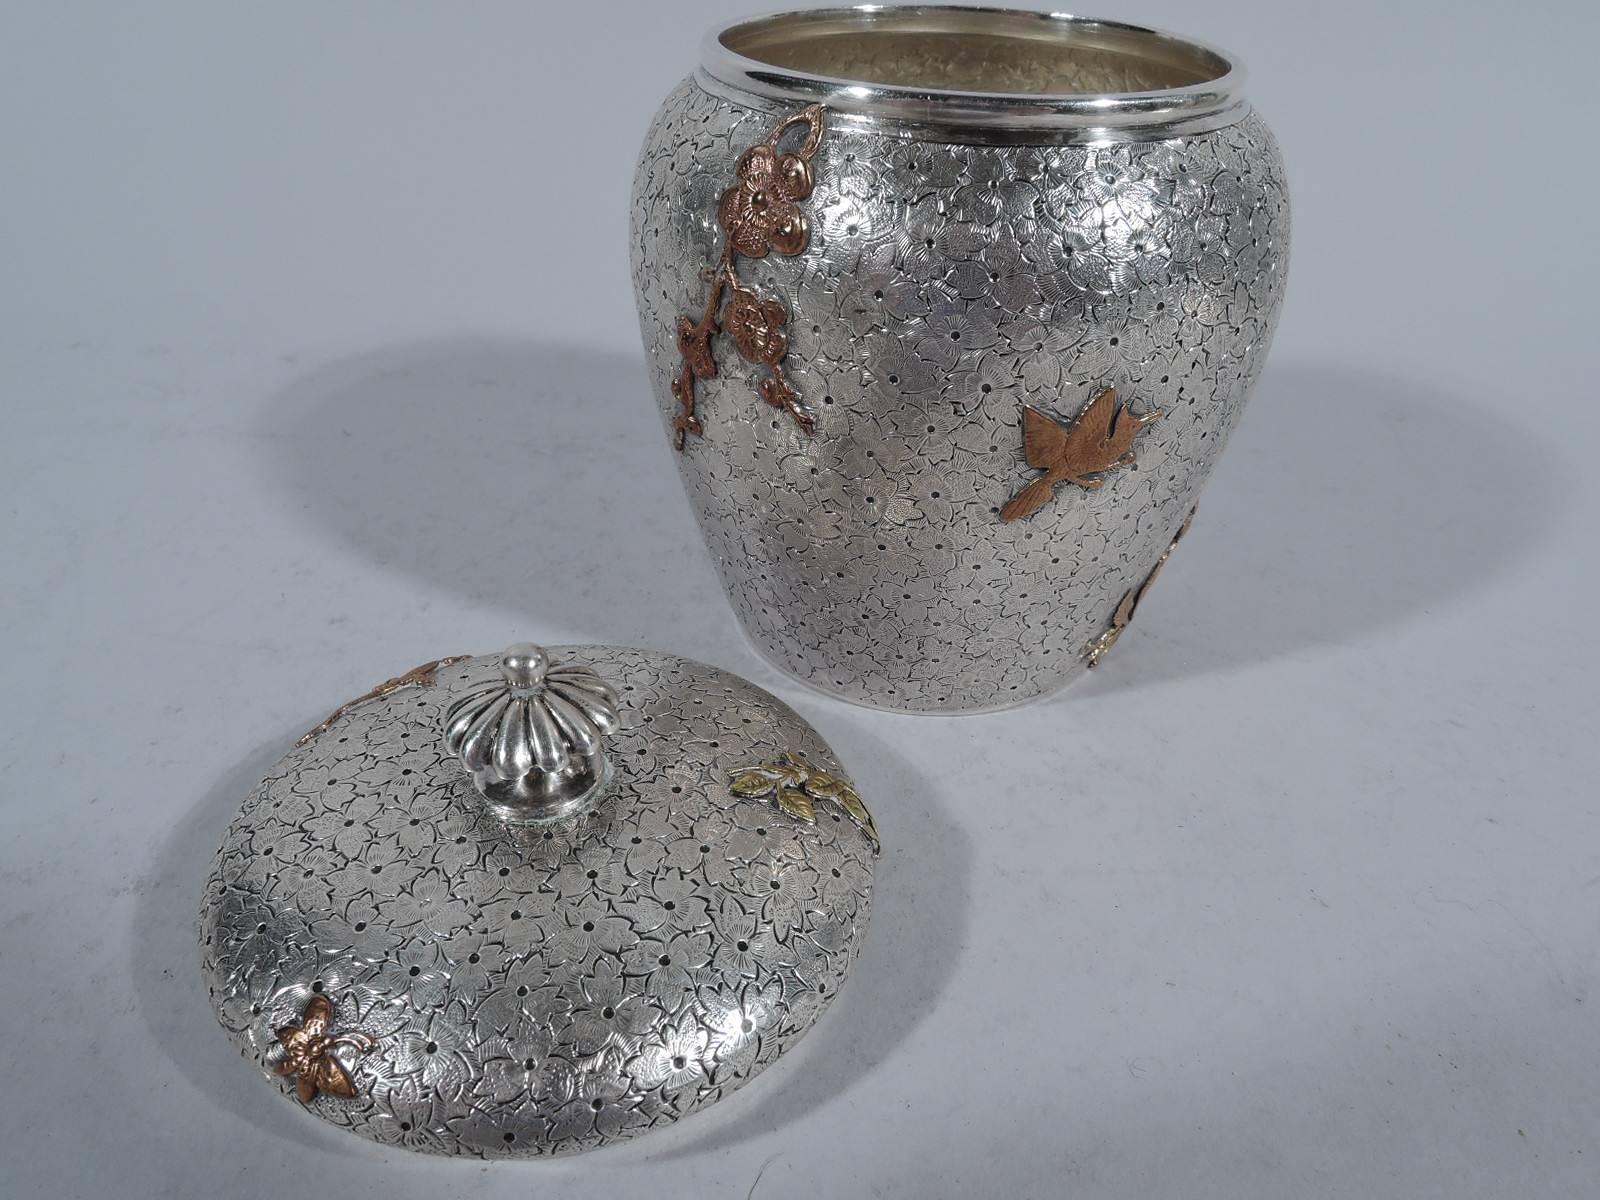 American Unusual Dominick & Haff Sterling Silver and Mixed Metal Tea Caddy